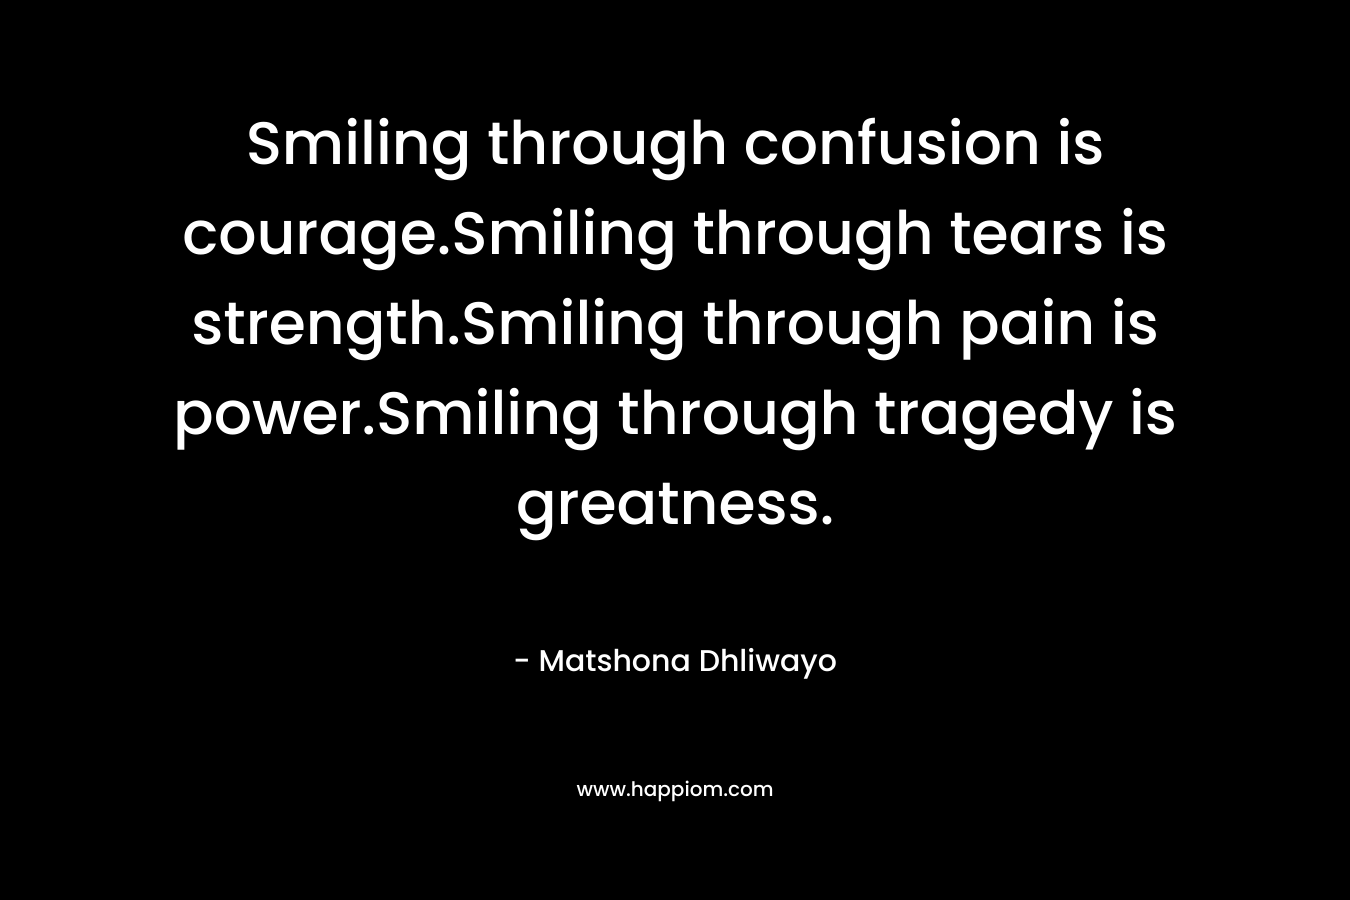 Smiling through confusion is courage.Smiling through tears is strength.Smiling through pain is power.Smiling through tragedy is greatness.